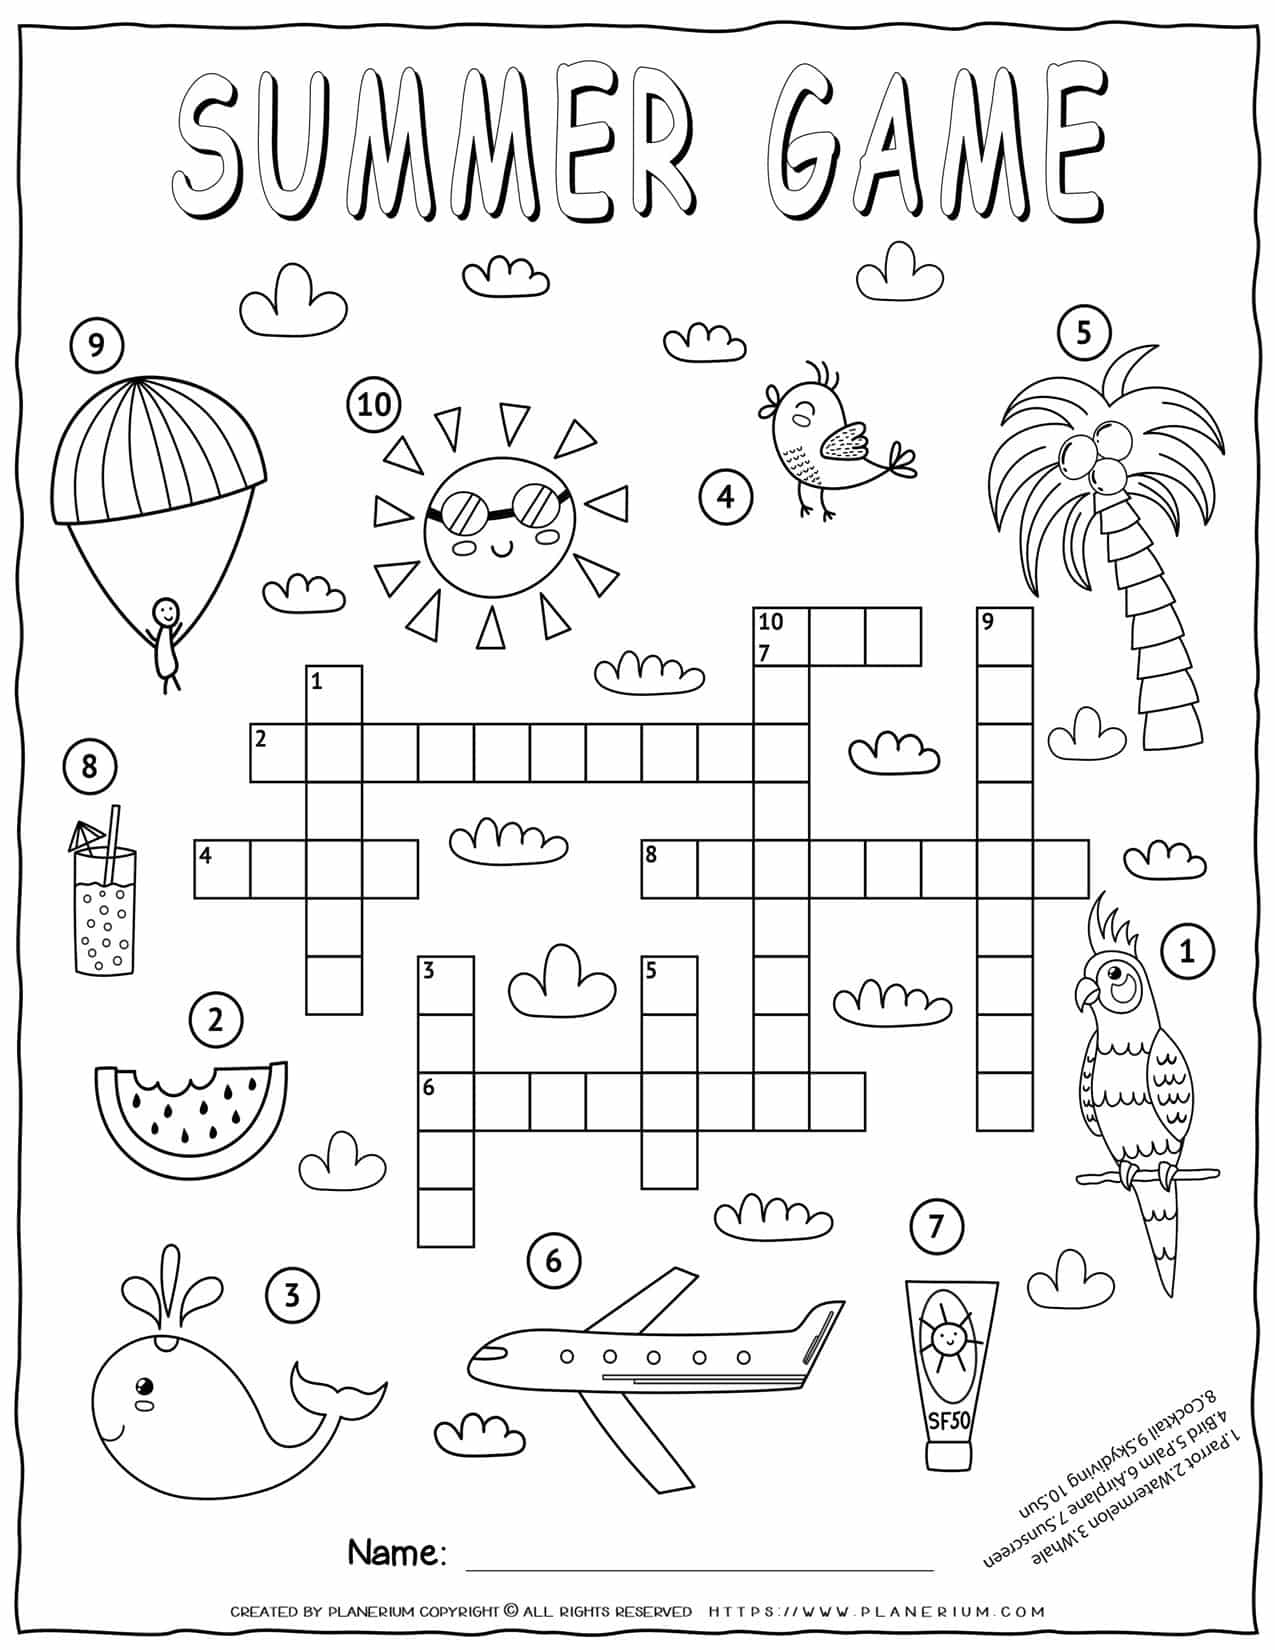 Summer-Themed Image Crossword Game for Kids in Black and White